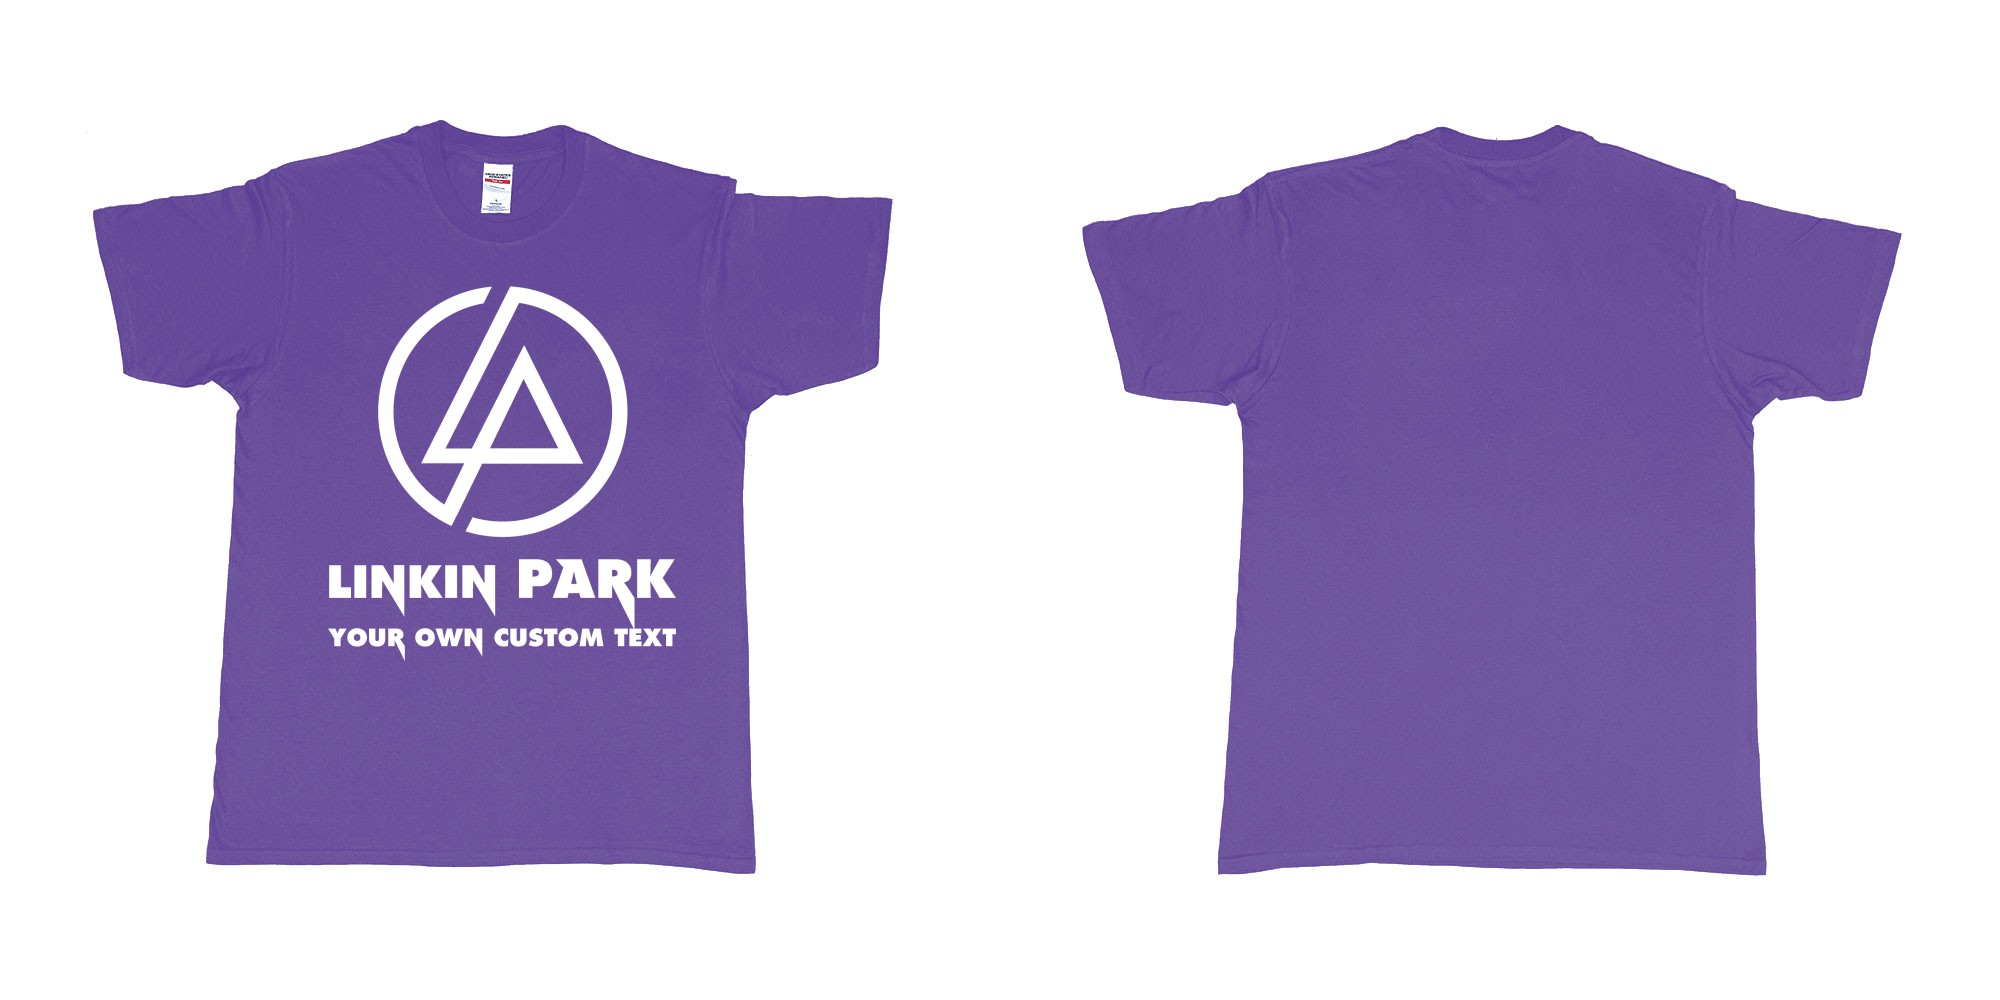 Custom tshirt design linkin park custom tshirt printing bali in fabric color purple choice your own text made in Bali by The Pirate Way